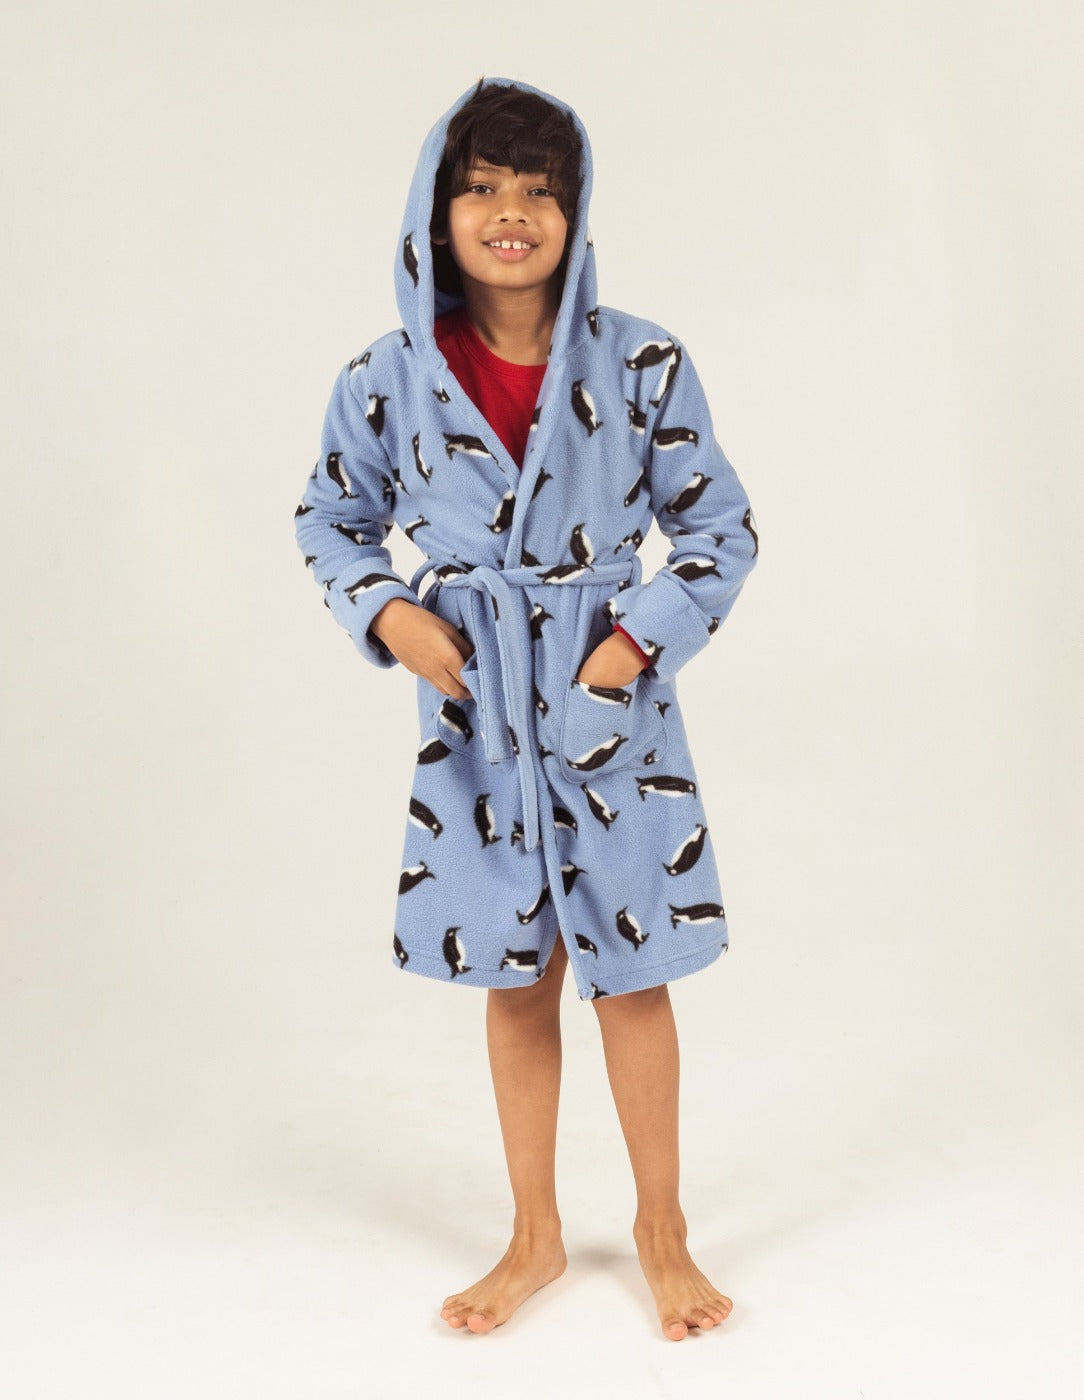 Childrens Blue Dressing Gown | Personalised Boys Robe | Order Online